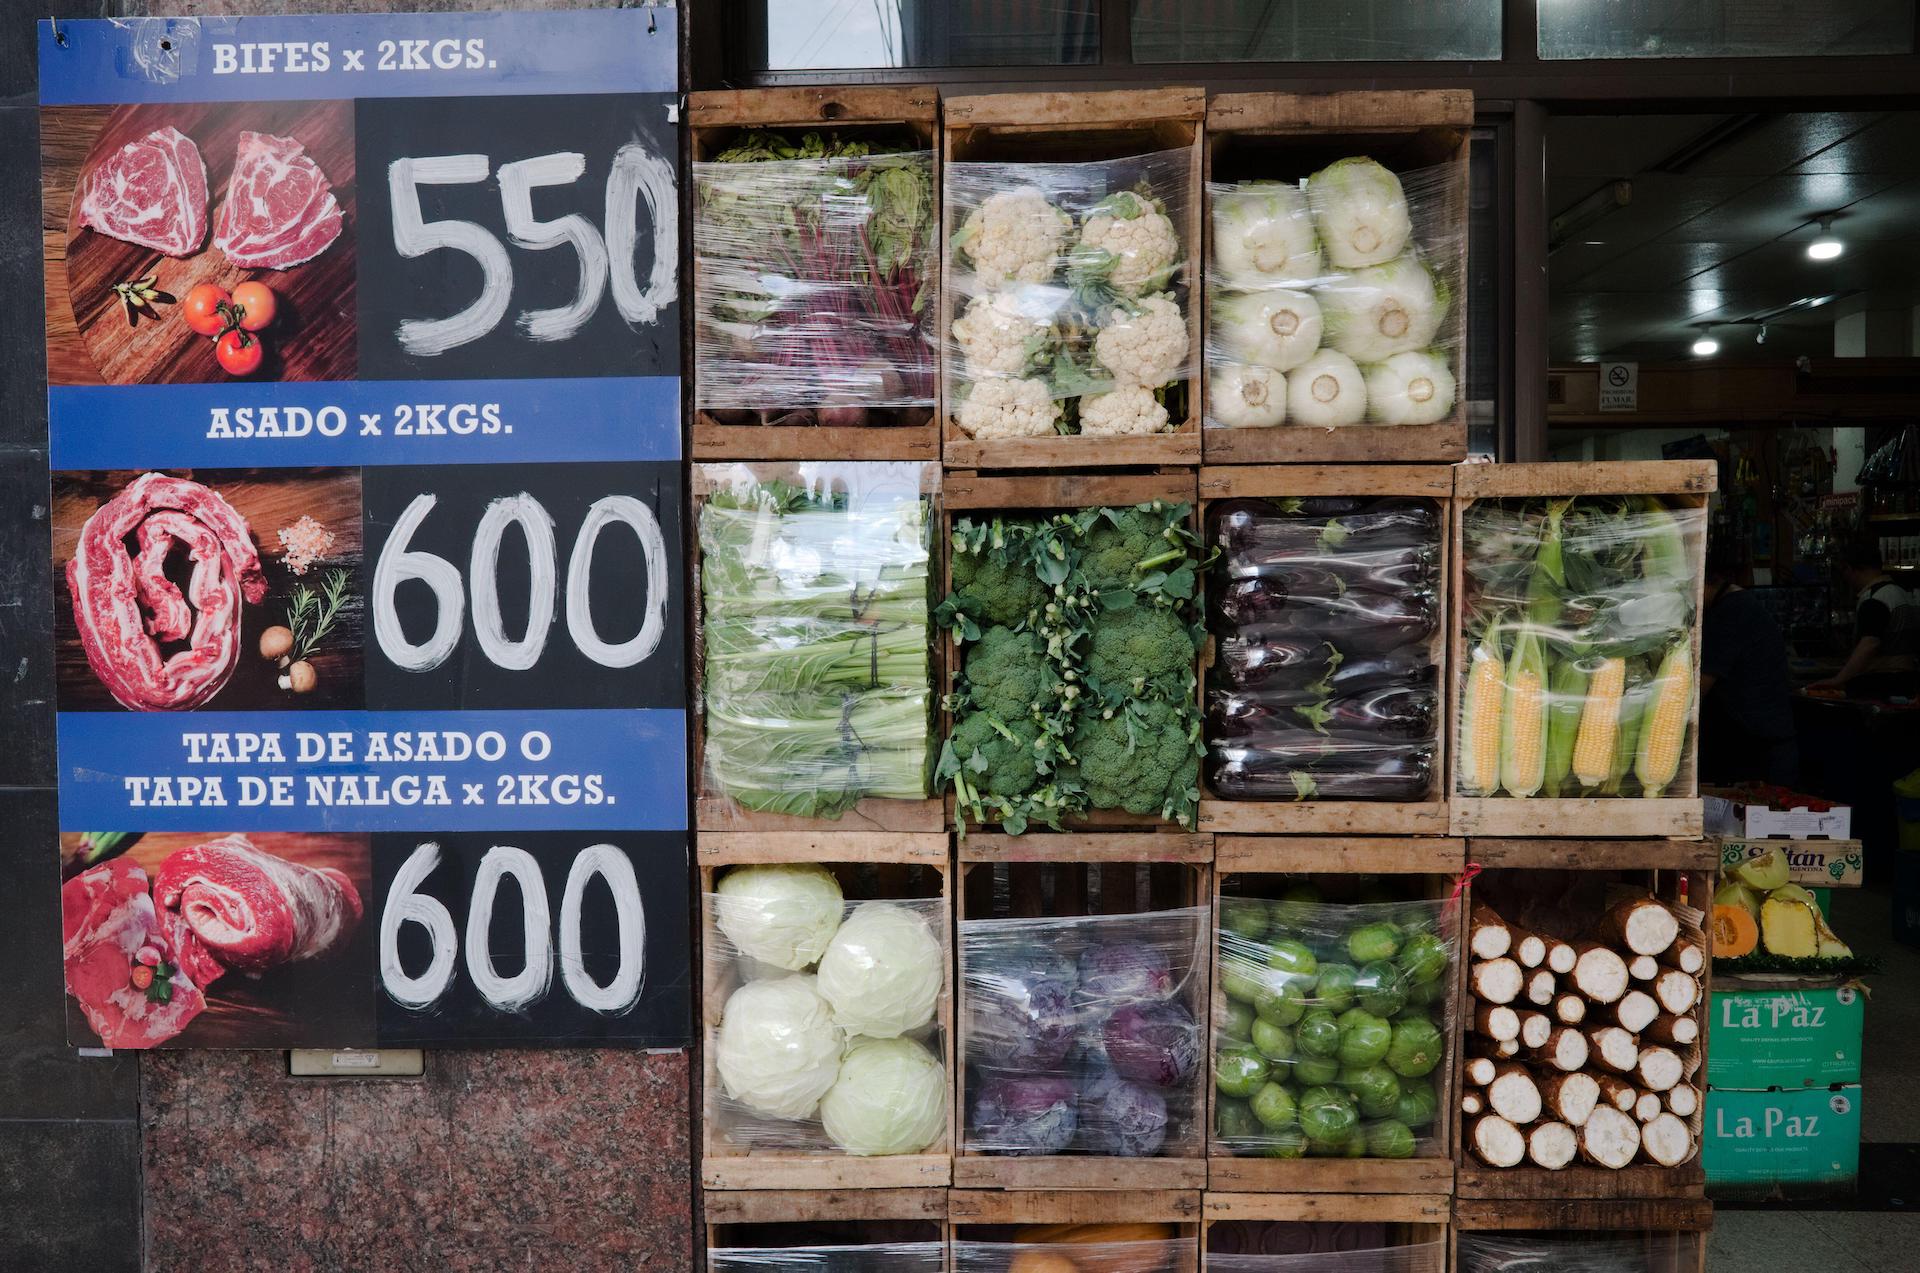 Vegetables and a poster with prices of meat